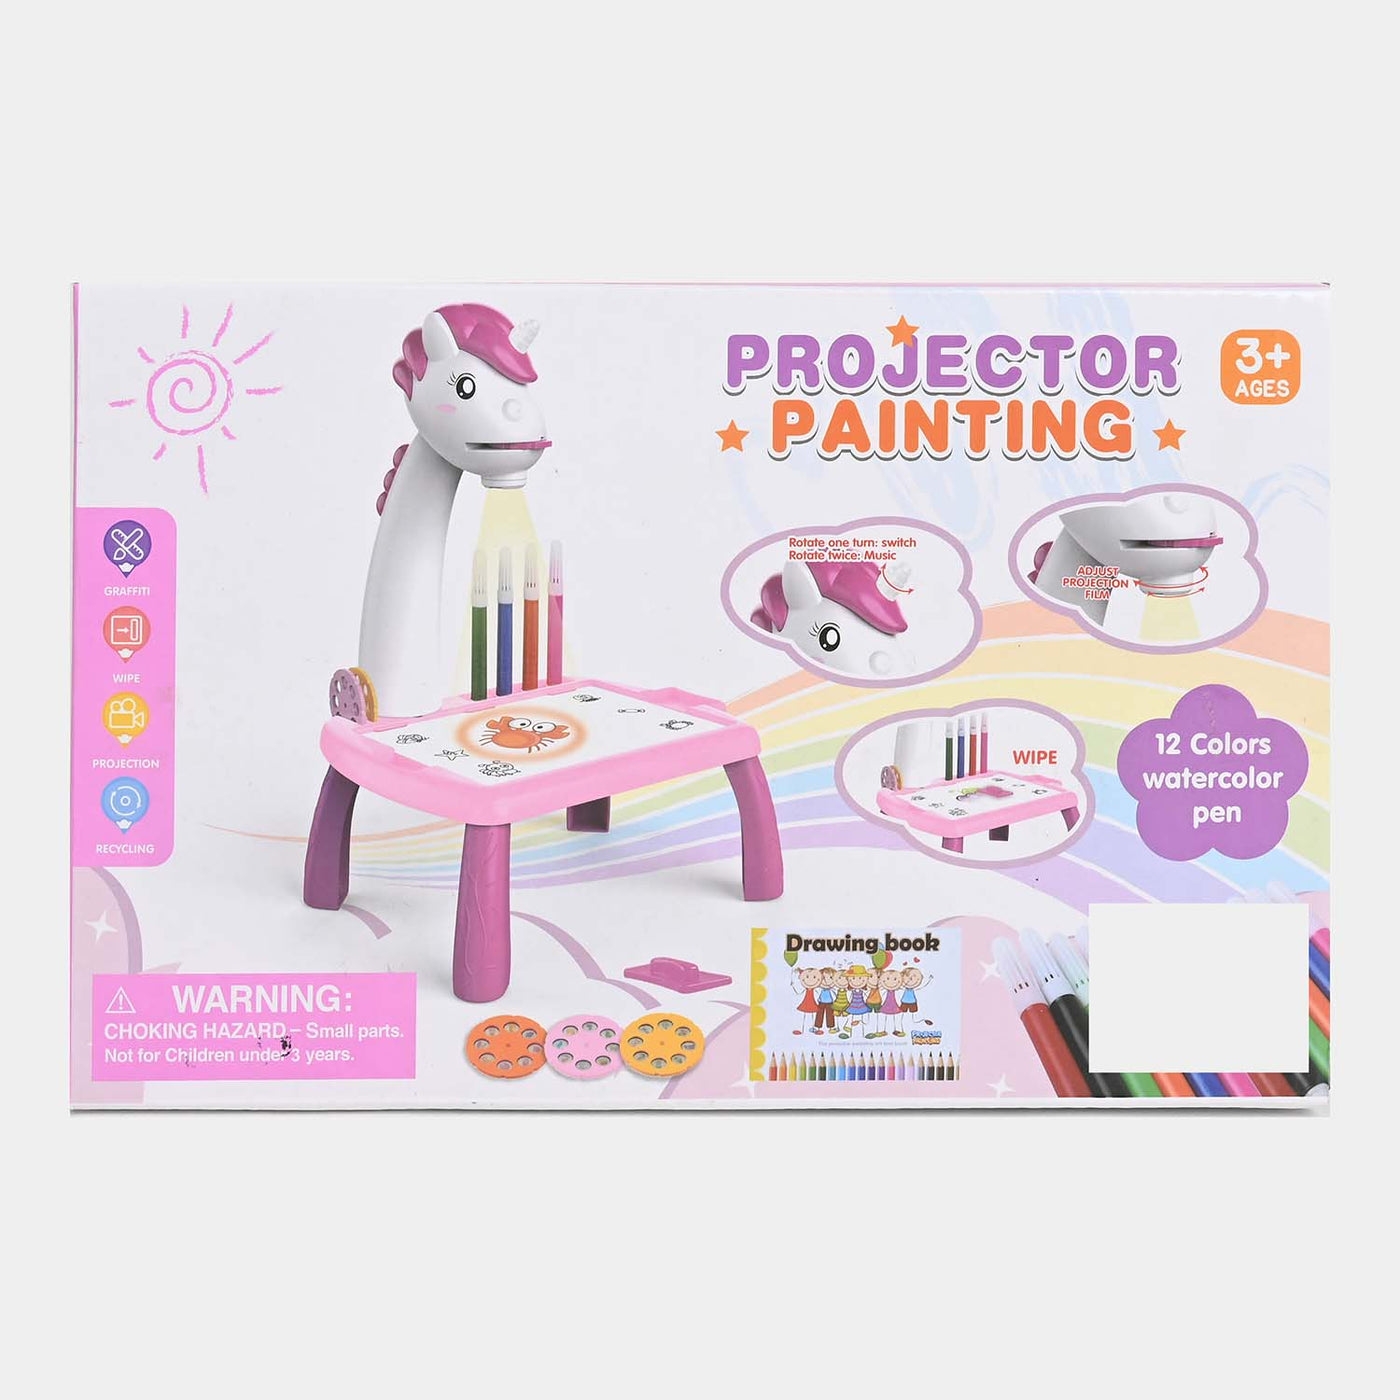 PROJECTION DRAWING TABLE BOARD FOR KIDS